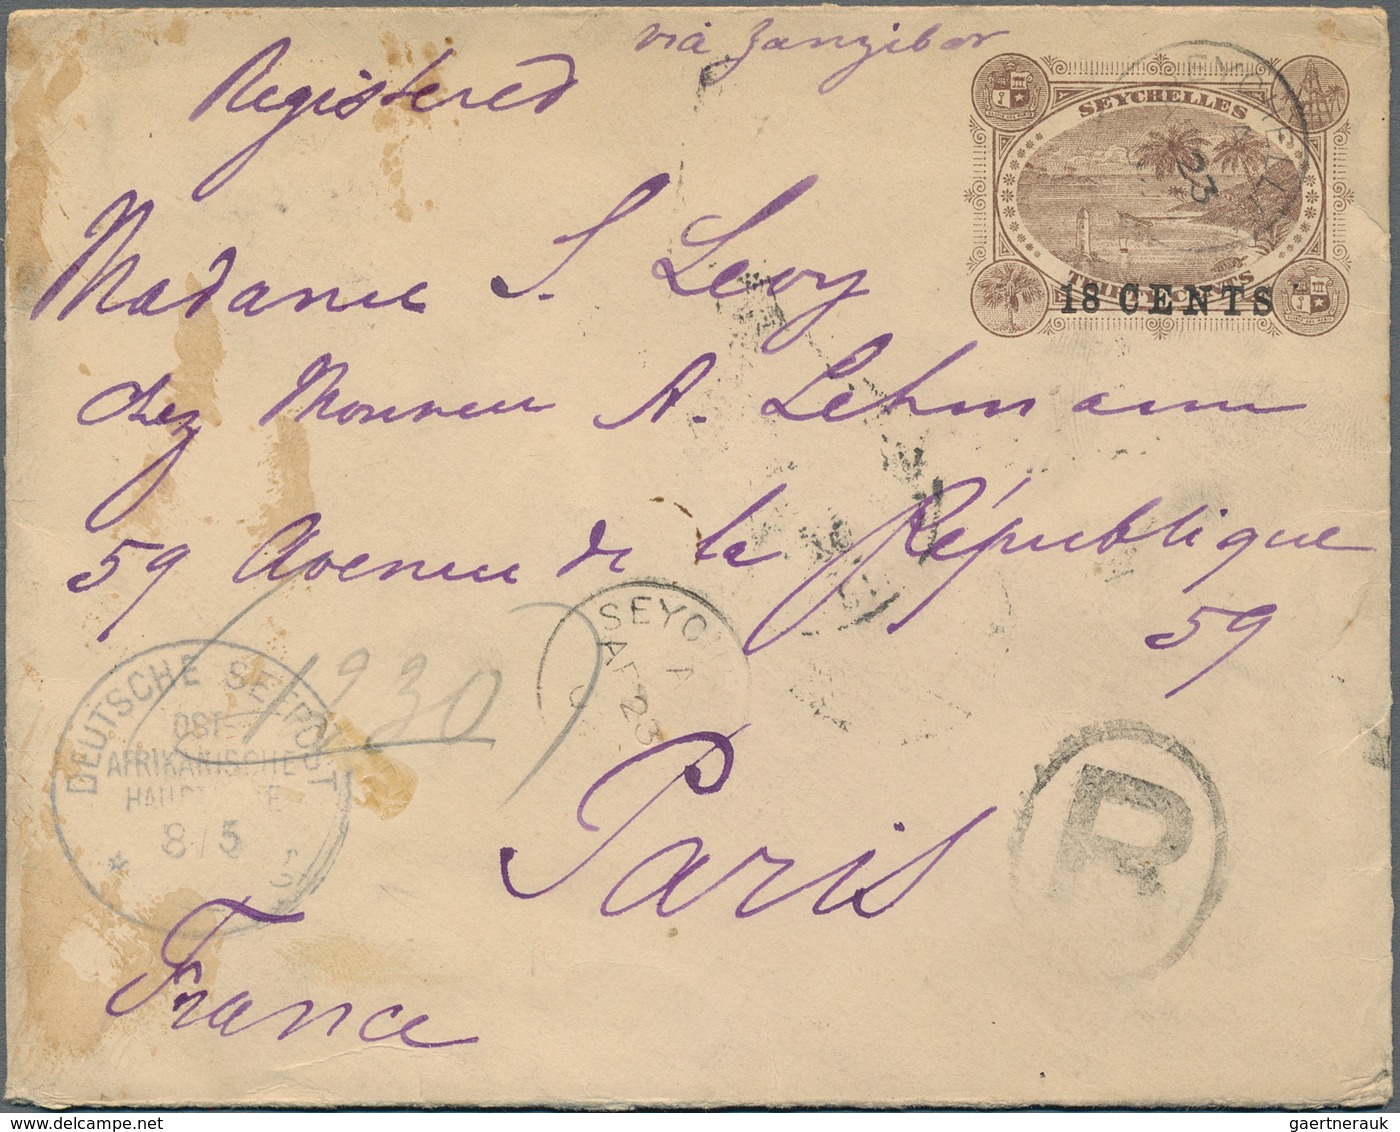 Seychellen: 1902, Stationery Envelope 18c. On 30c. Brown, Uprated On Reverse By Two Horizontal Pairs - Seychellen (...-1976)